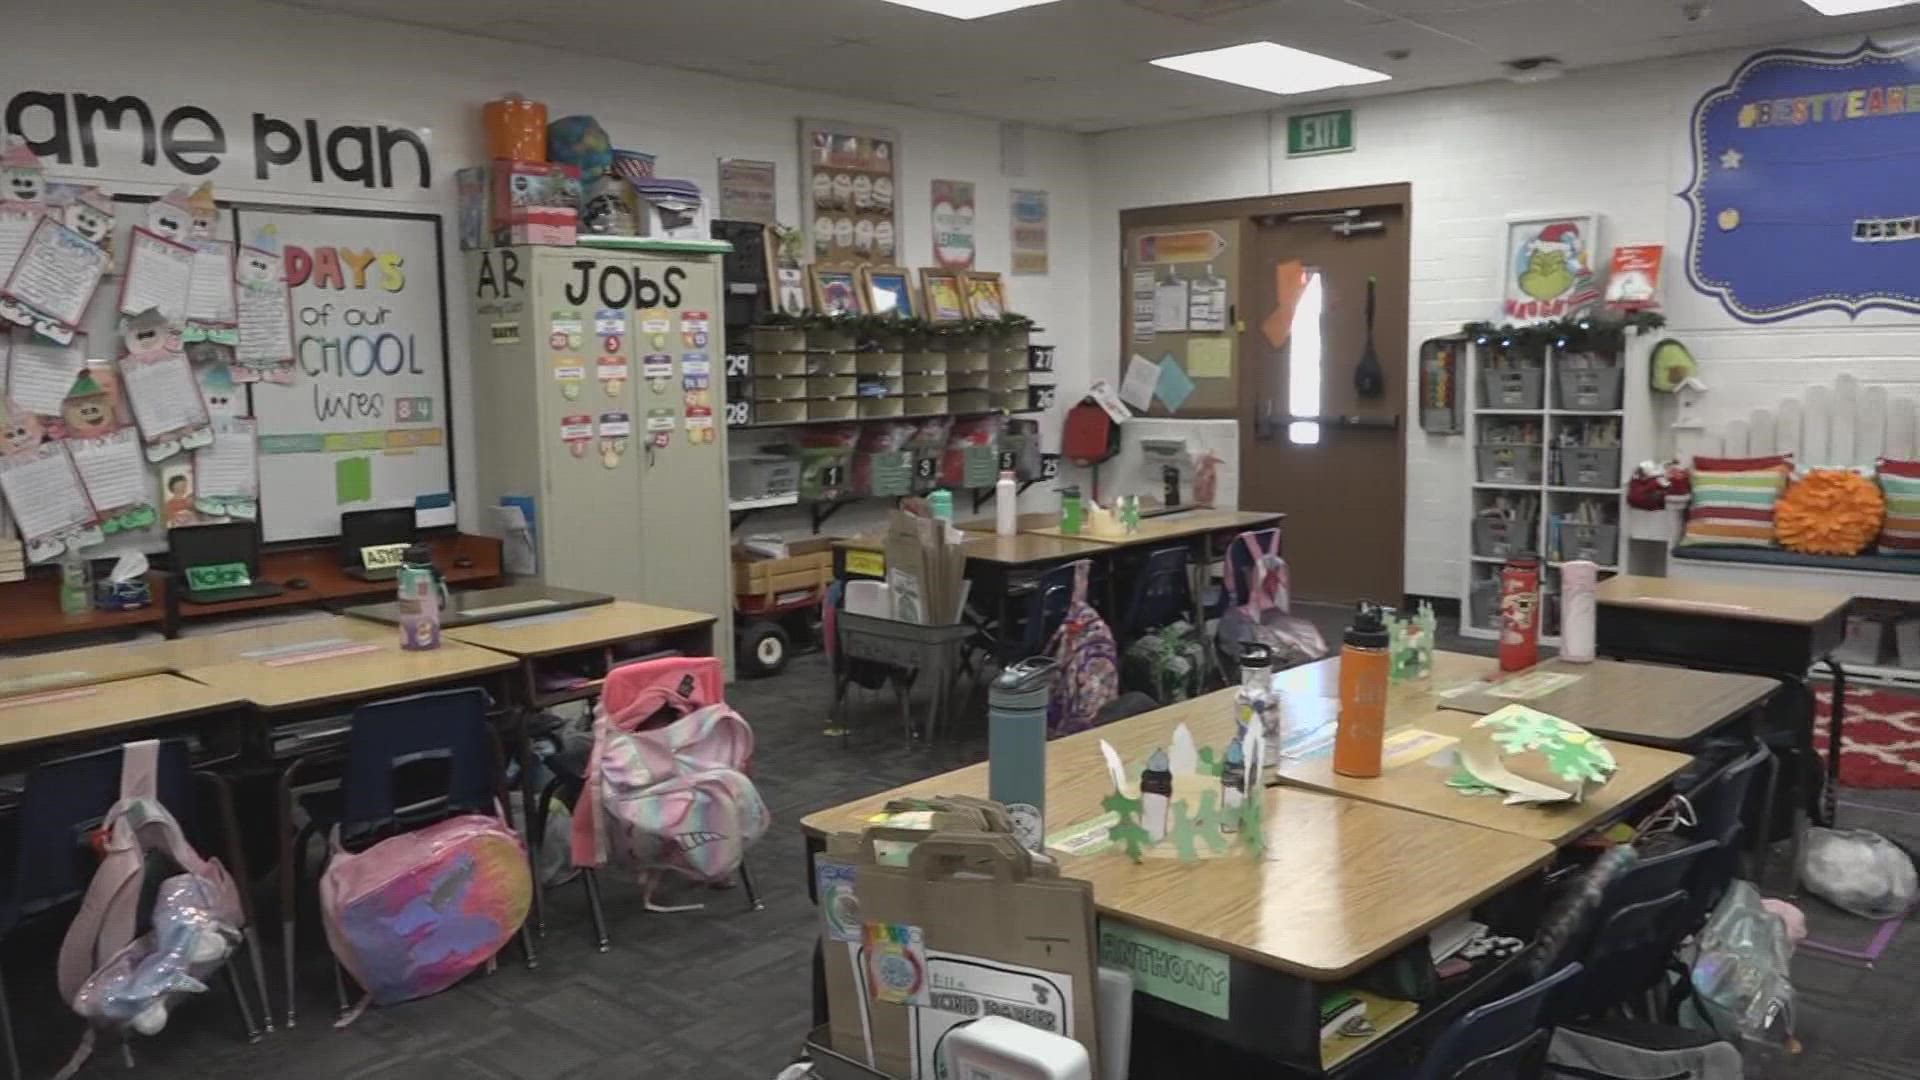 If the school spending limit isn't lifted, school districts across Arizona could be faced with tough cuts for their budget. Jen Wahl has the details.